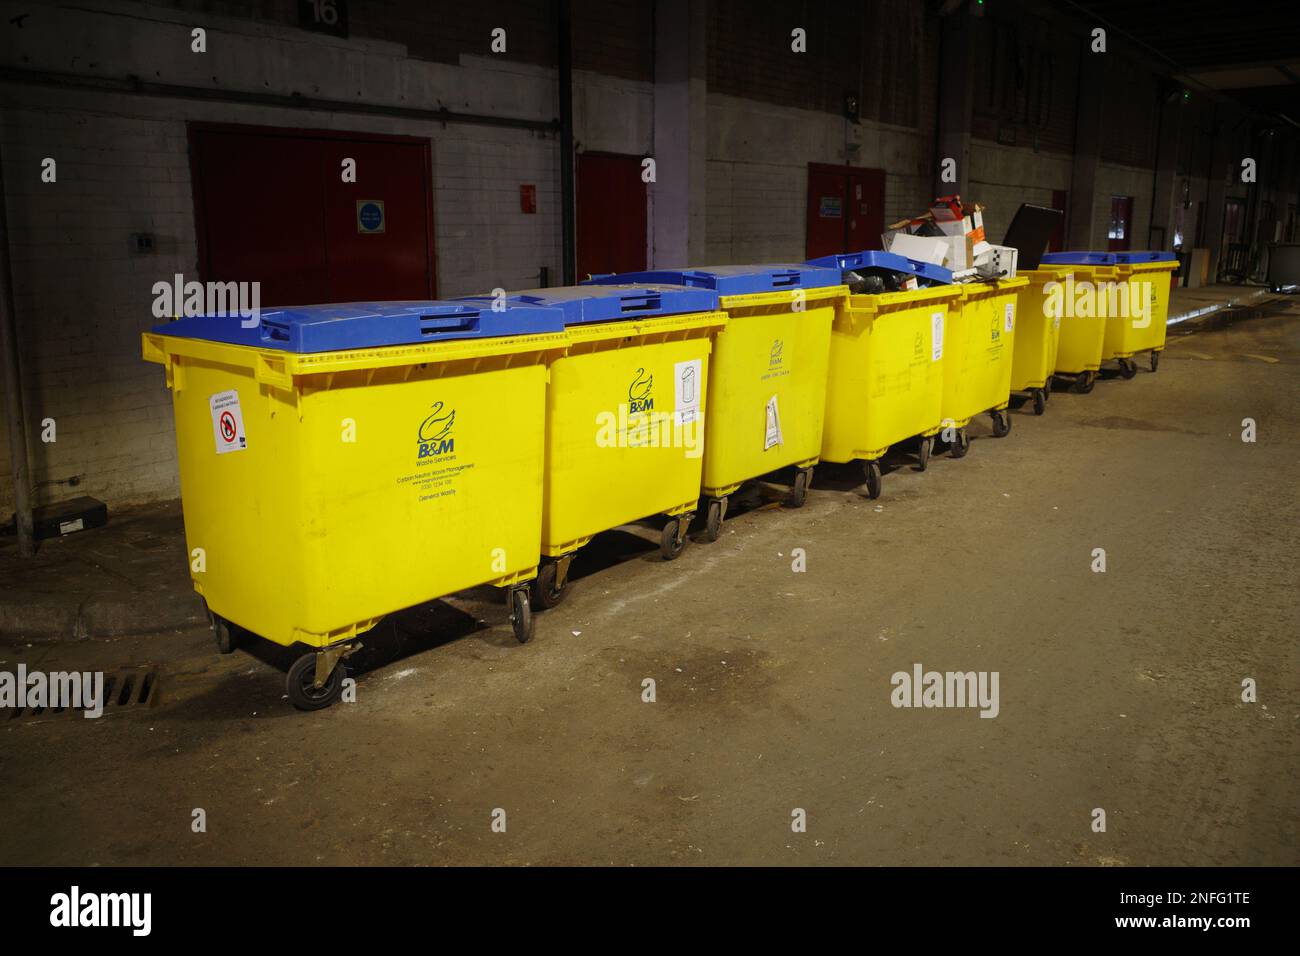 Blue and yellow coloured bins, dumpsters or receptacles, England, UK Stock Photo